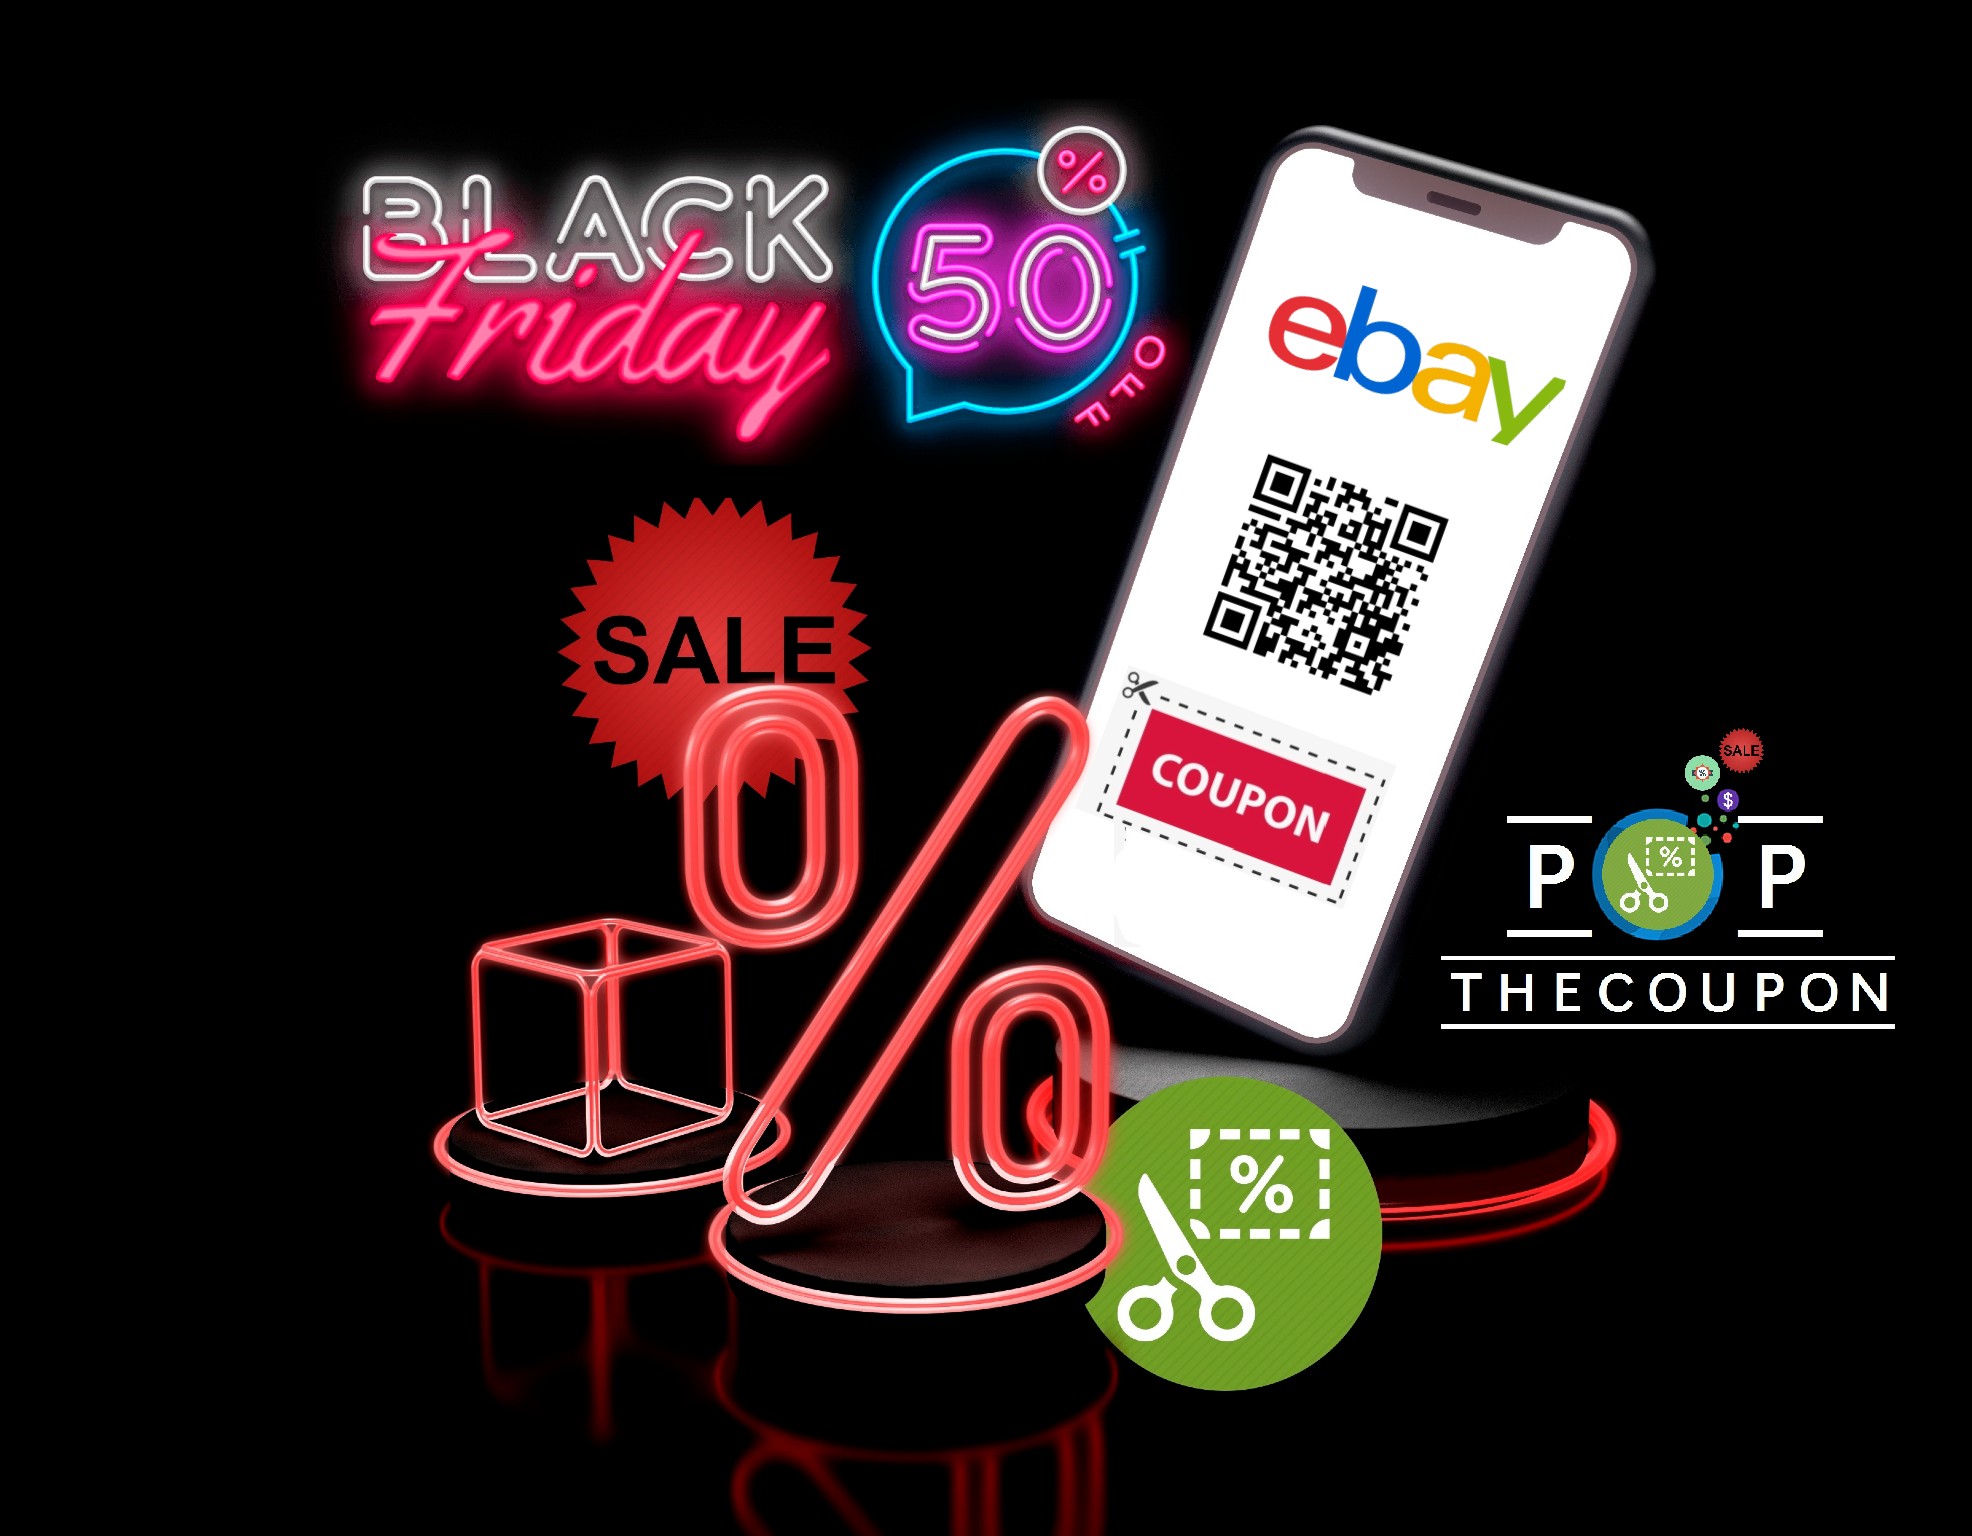 eBay Coupon Code 20 OFF, Discounts, Promo Codes Pop The Coupon